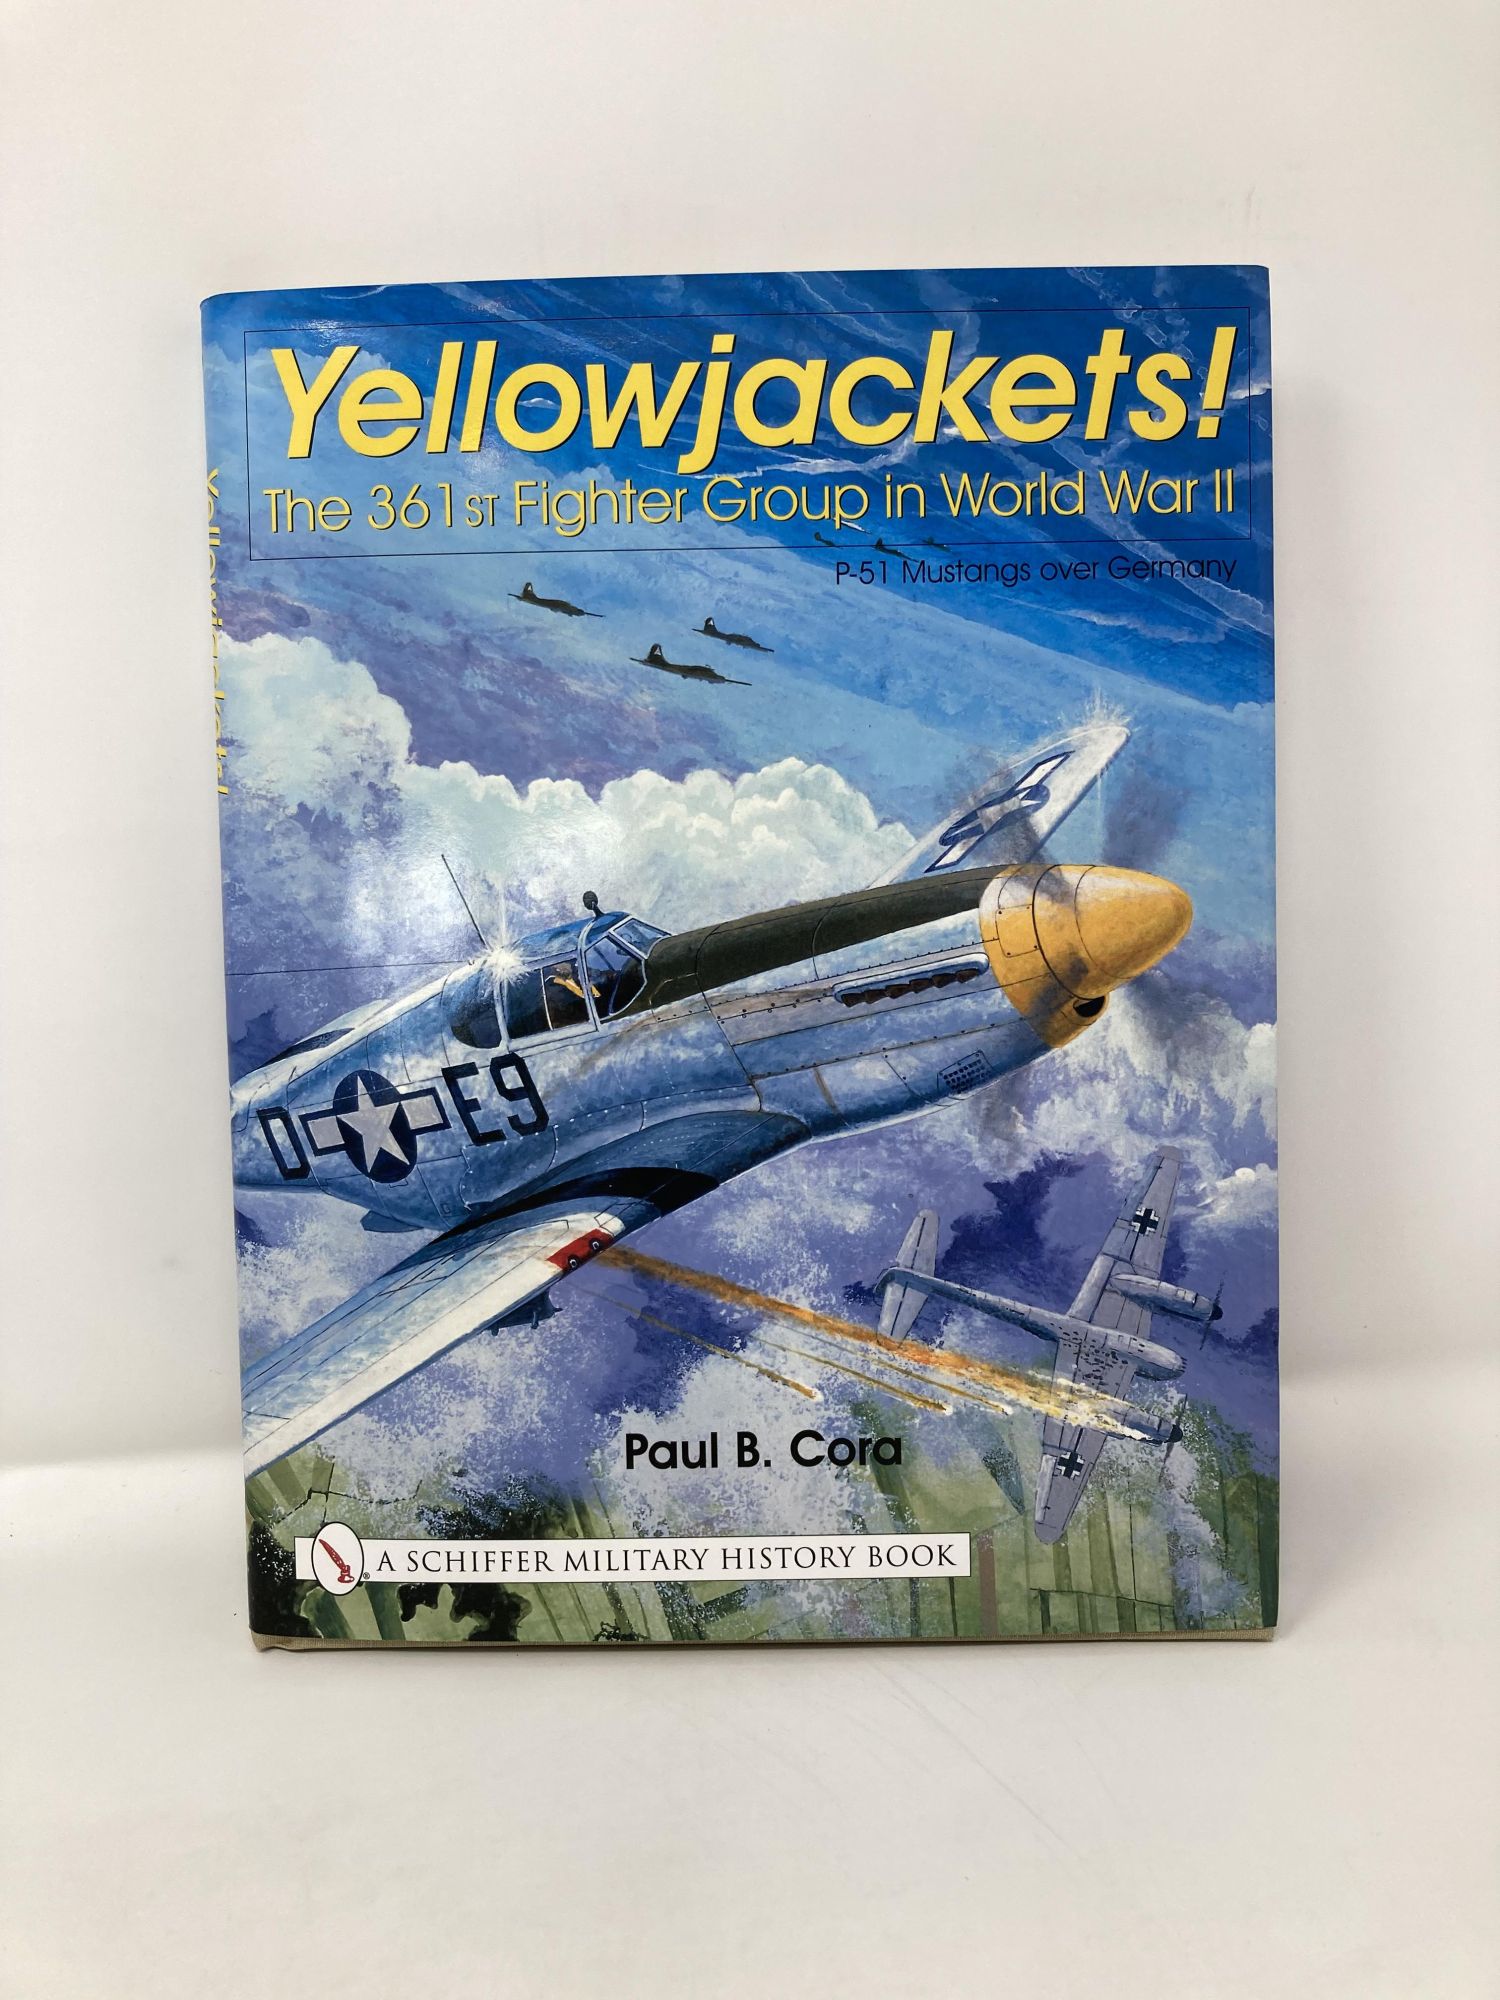 Yellowjackets!: The 361st Fighter Group in World War II - P-51 